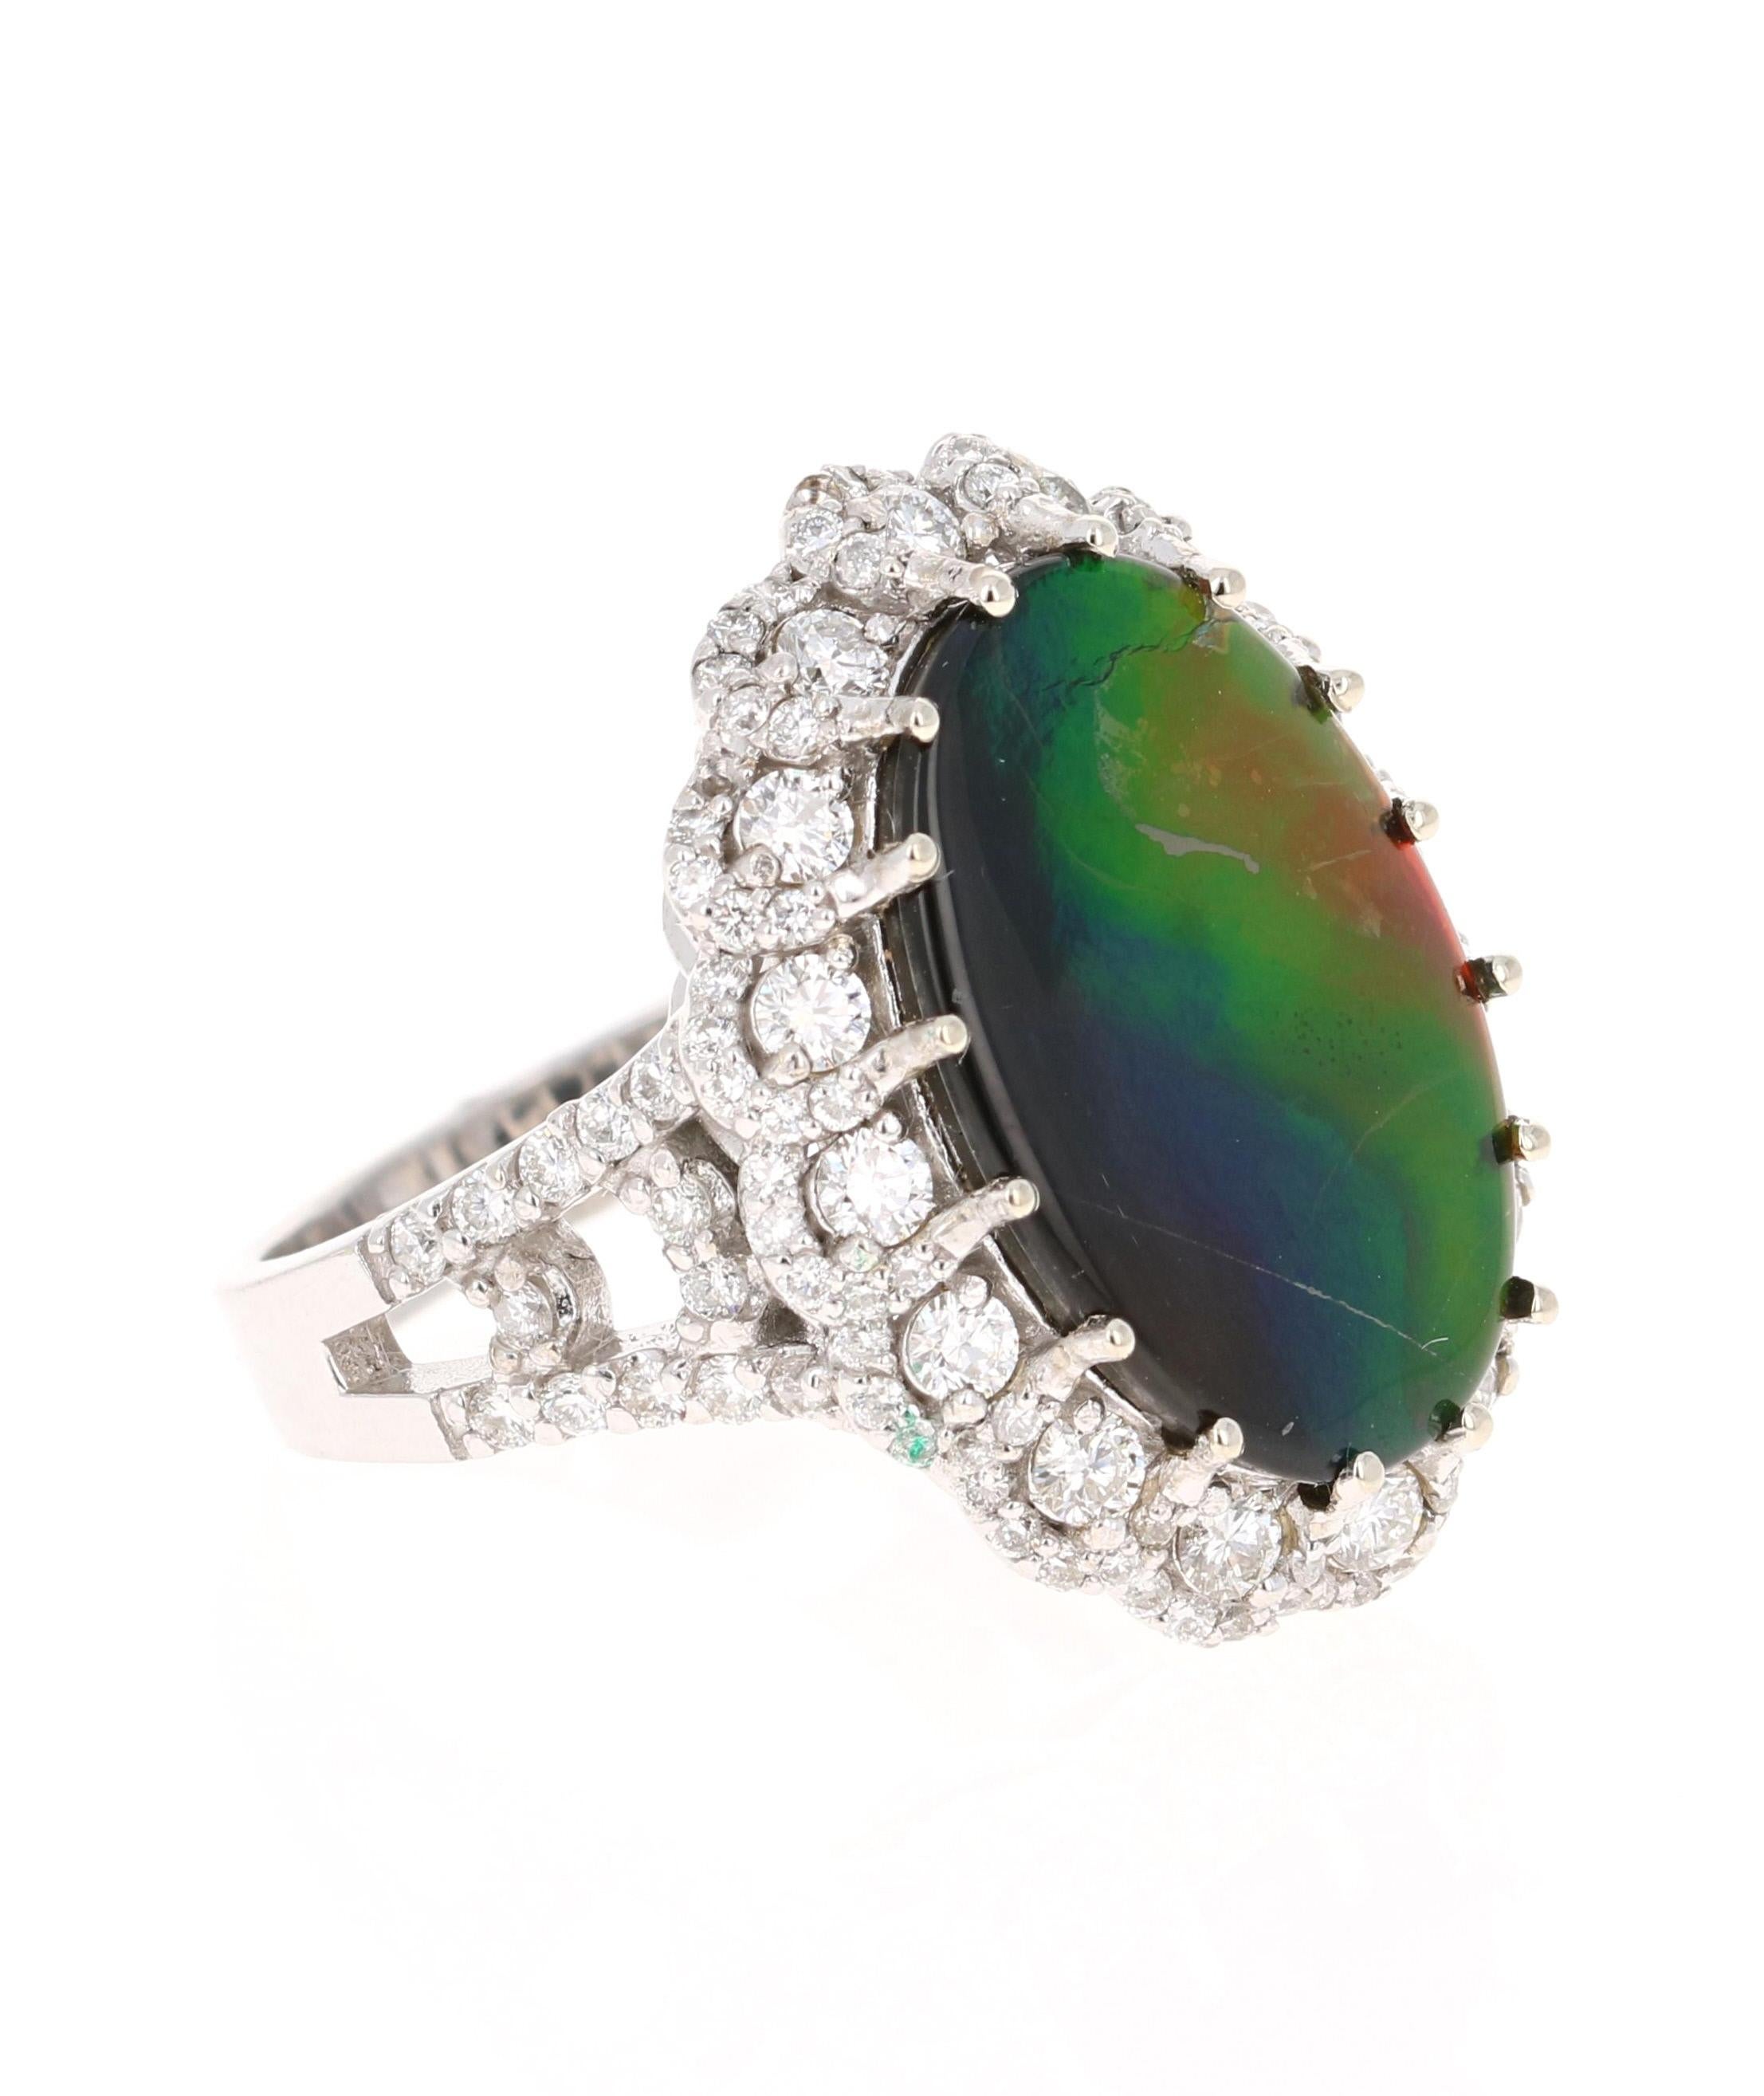 Rainbow Masterpiece! 

This unique ring has a 5.10 Carat Oval Cut Amolite.  Amolite is an Opal-like organic gemstone that is primarily found in the eastern slopes of the North American Rocky Mountains. The Amolite has hues of green, blue, yellow &